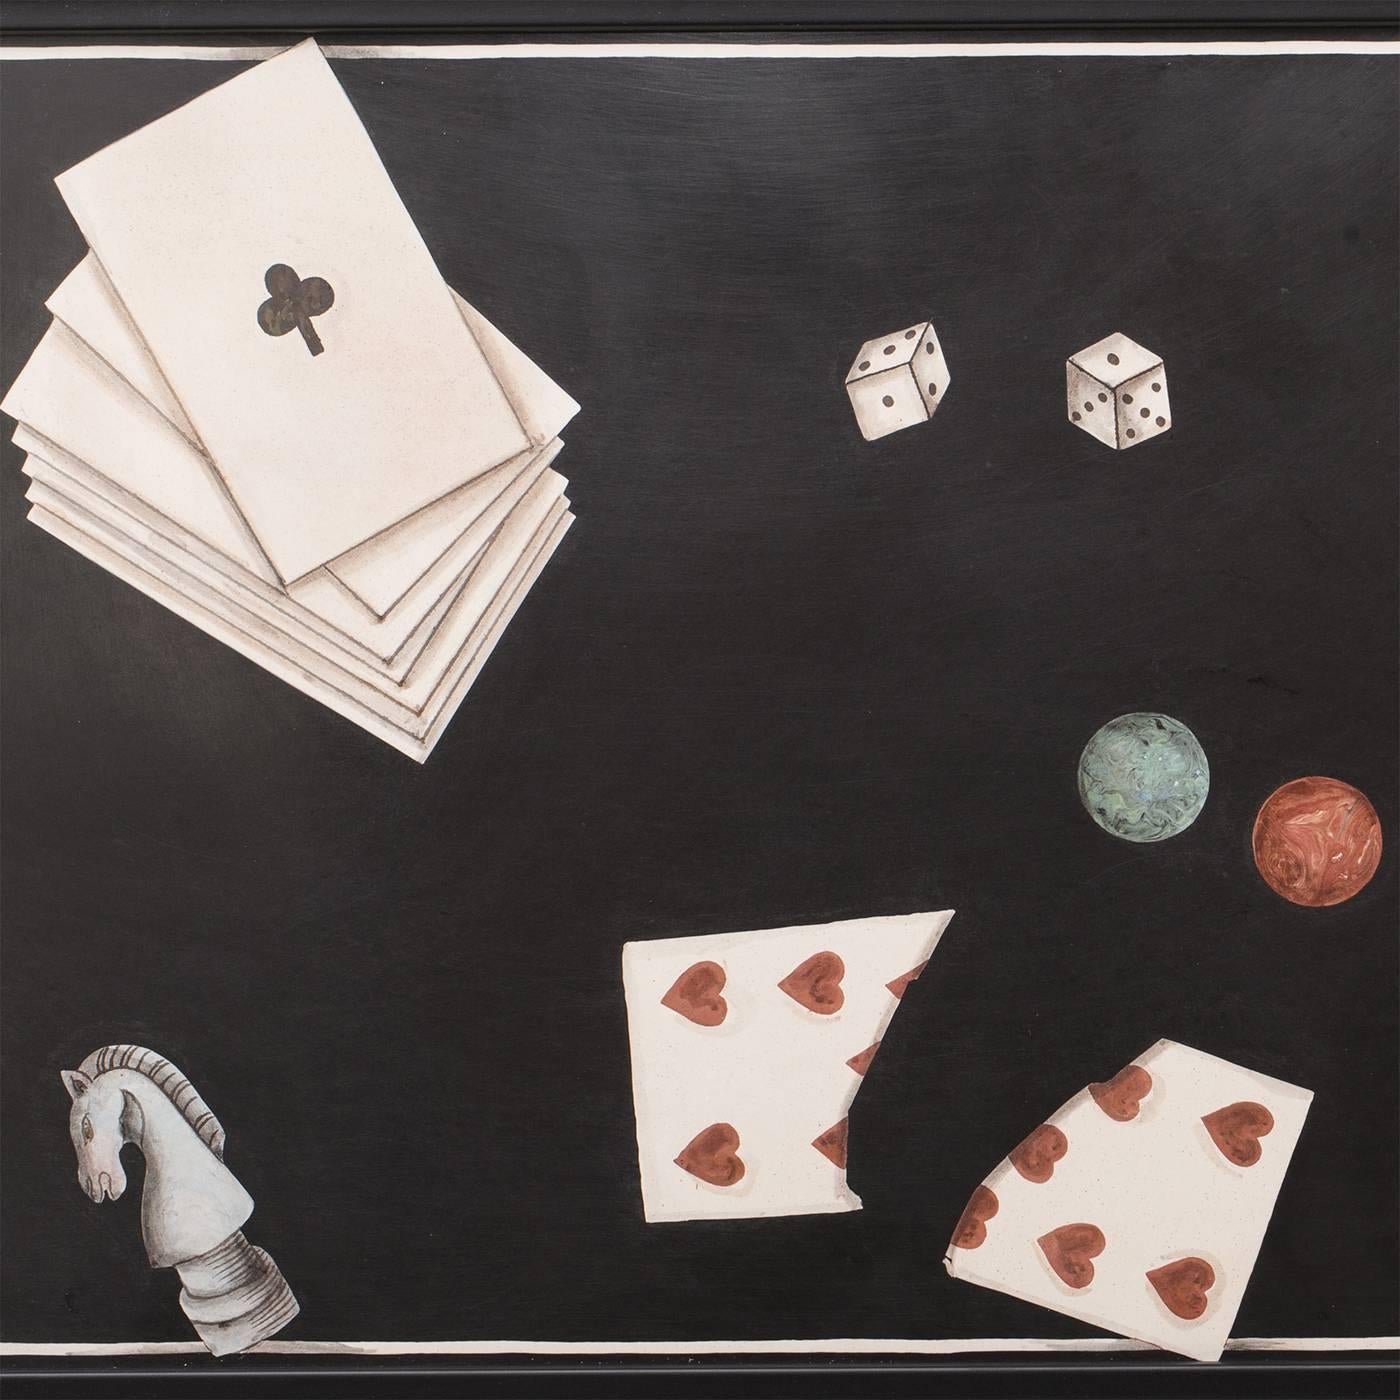 This poker inspired tableau is a unique piece entirely handcrafted by Tuscan artisan Bianco Bianchi. The black slate base is decorated with a playful, traditionally executed scagliola inlay inspired by 18th century originals.